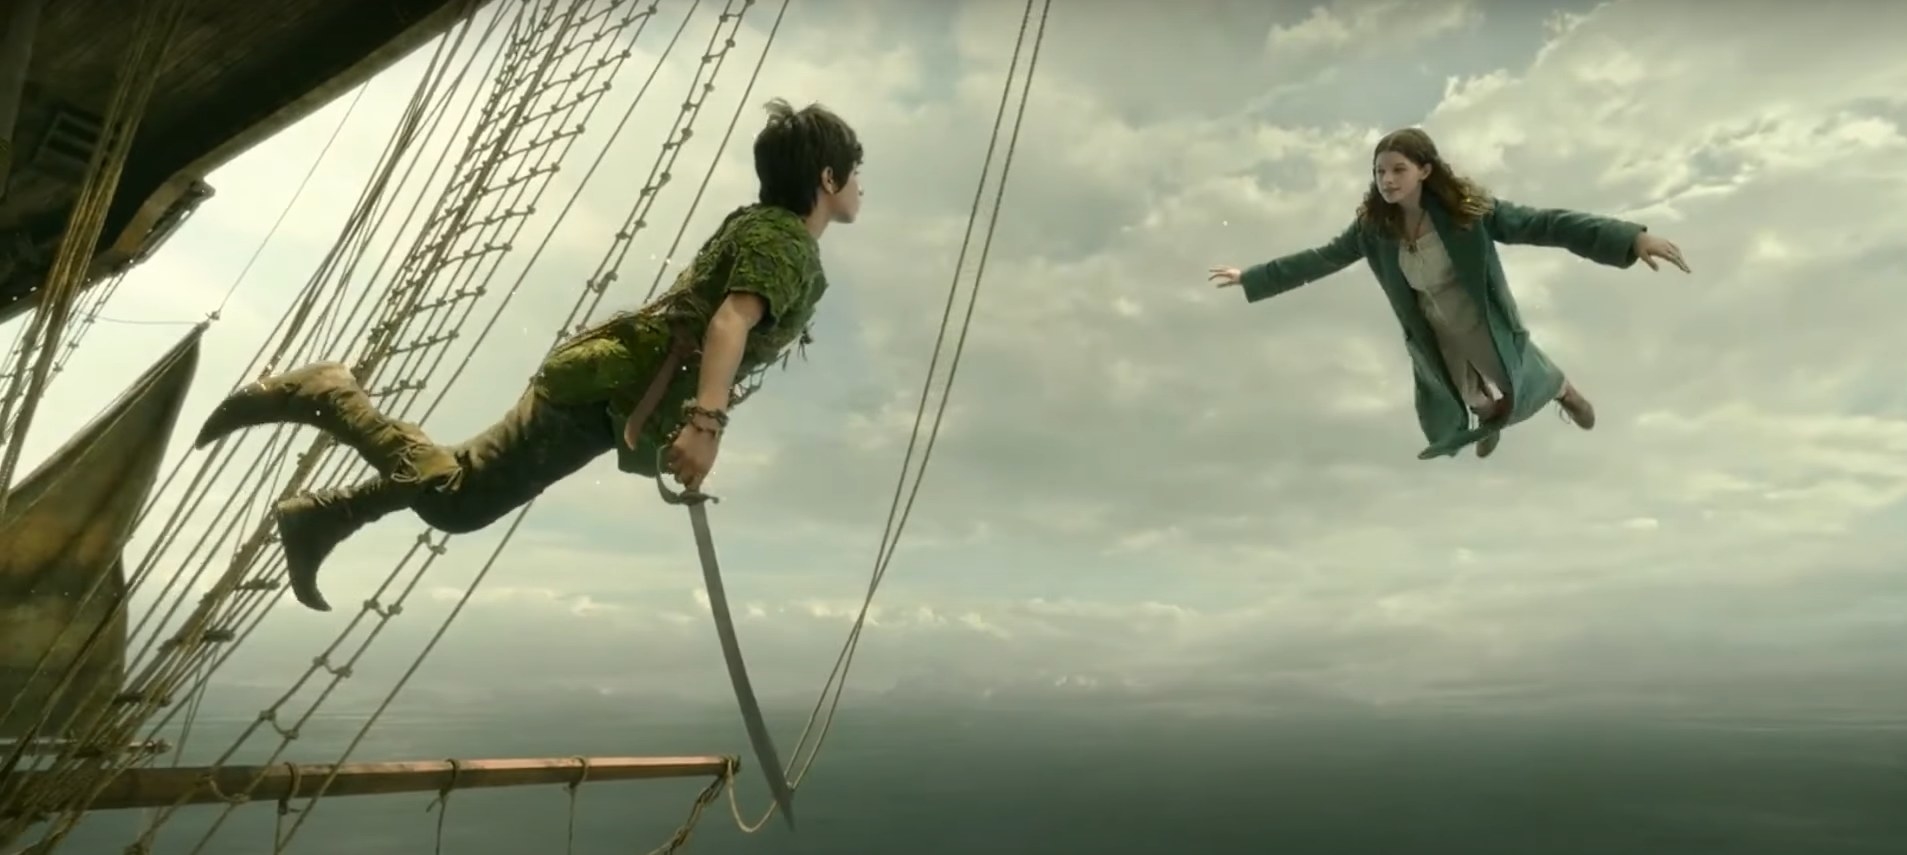 Peter Pan and Wendy flying next to a pirate ship in the sky